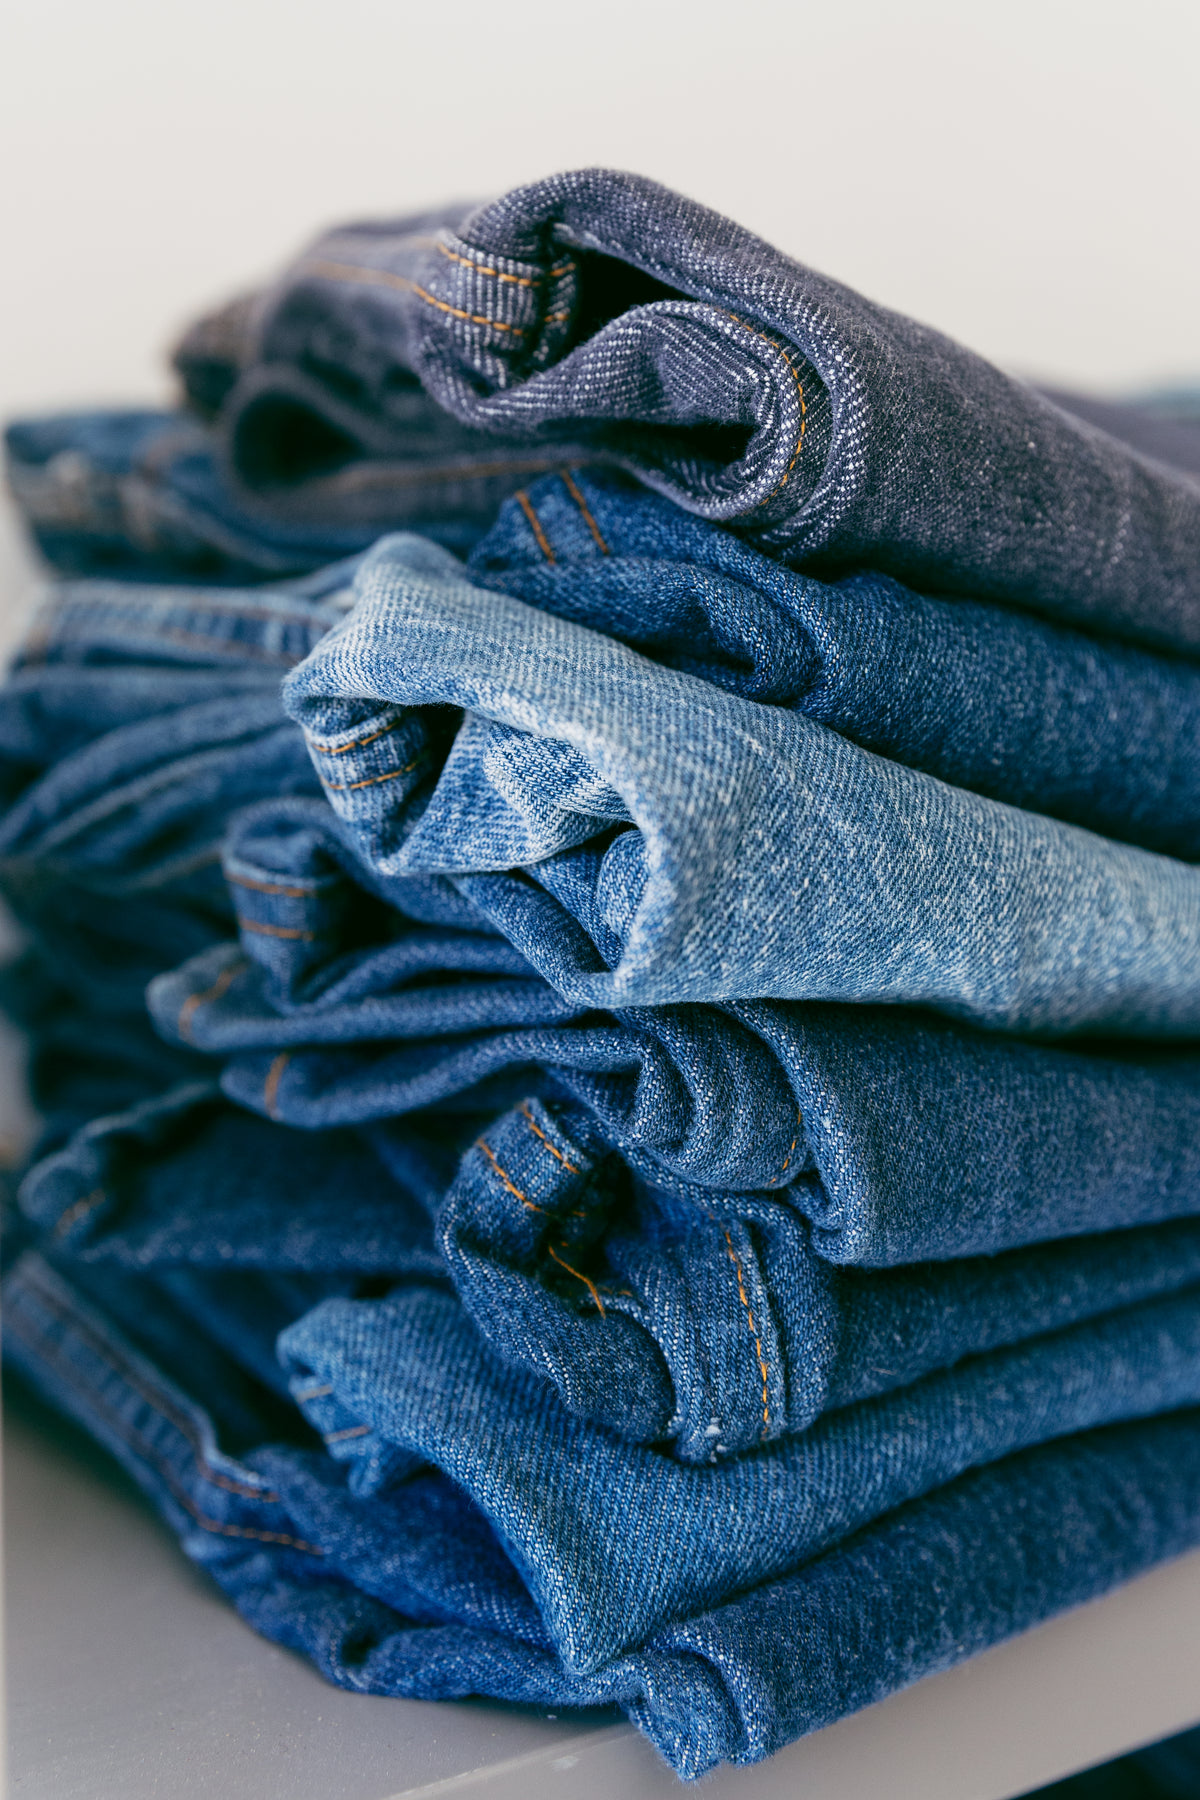 a pile of denim jeans in different shades of blue